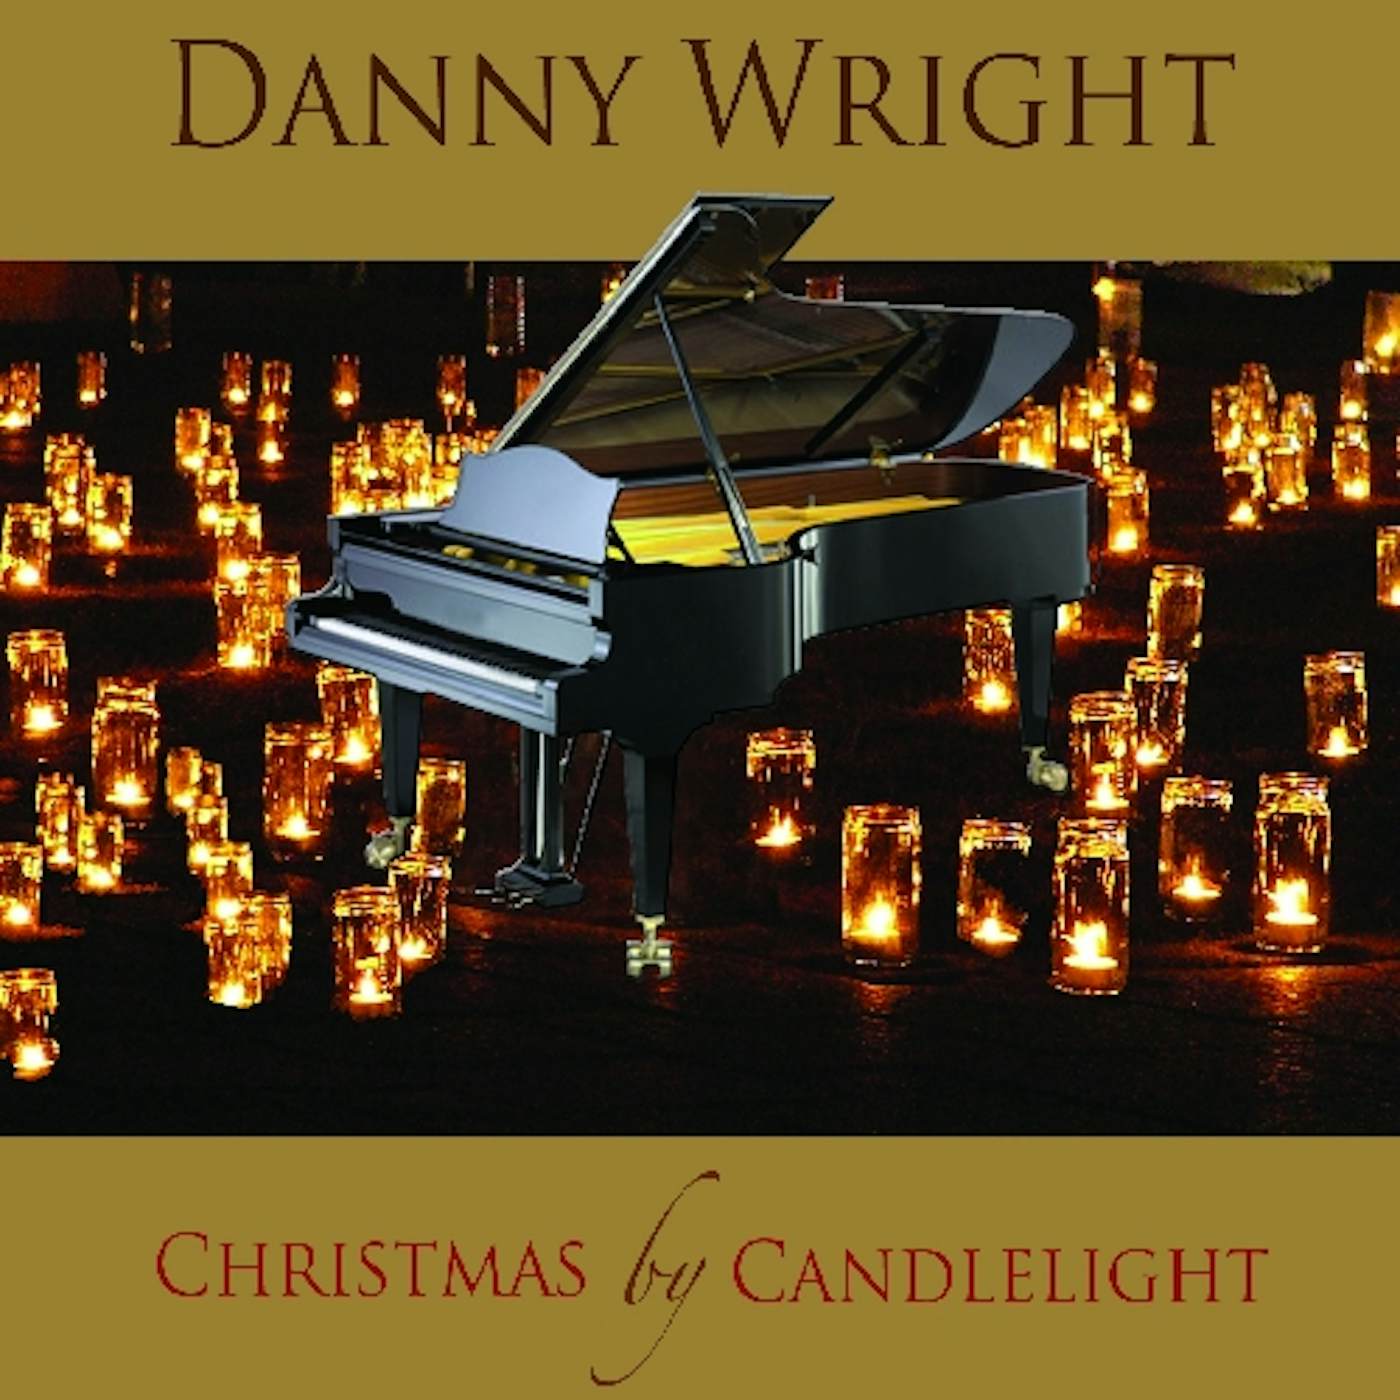 Danny Wright CHRISTMAS BY CANDLELIGHT CD